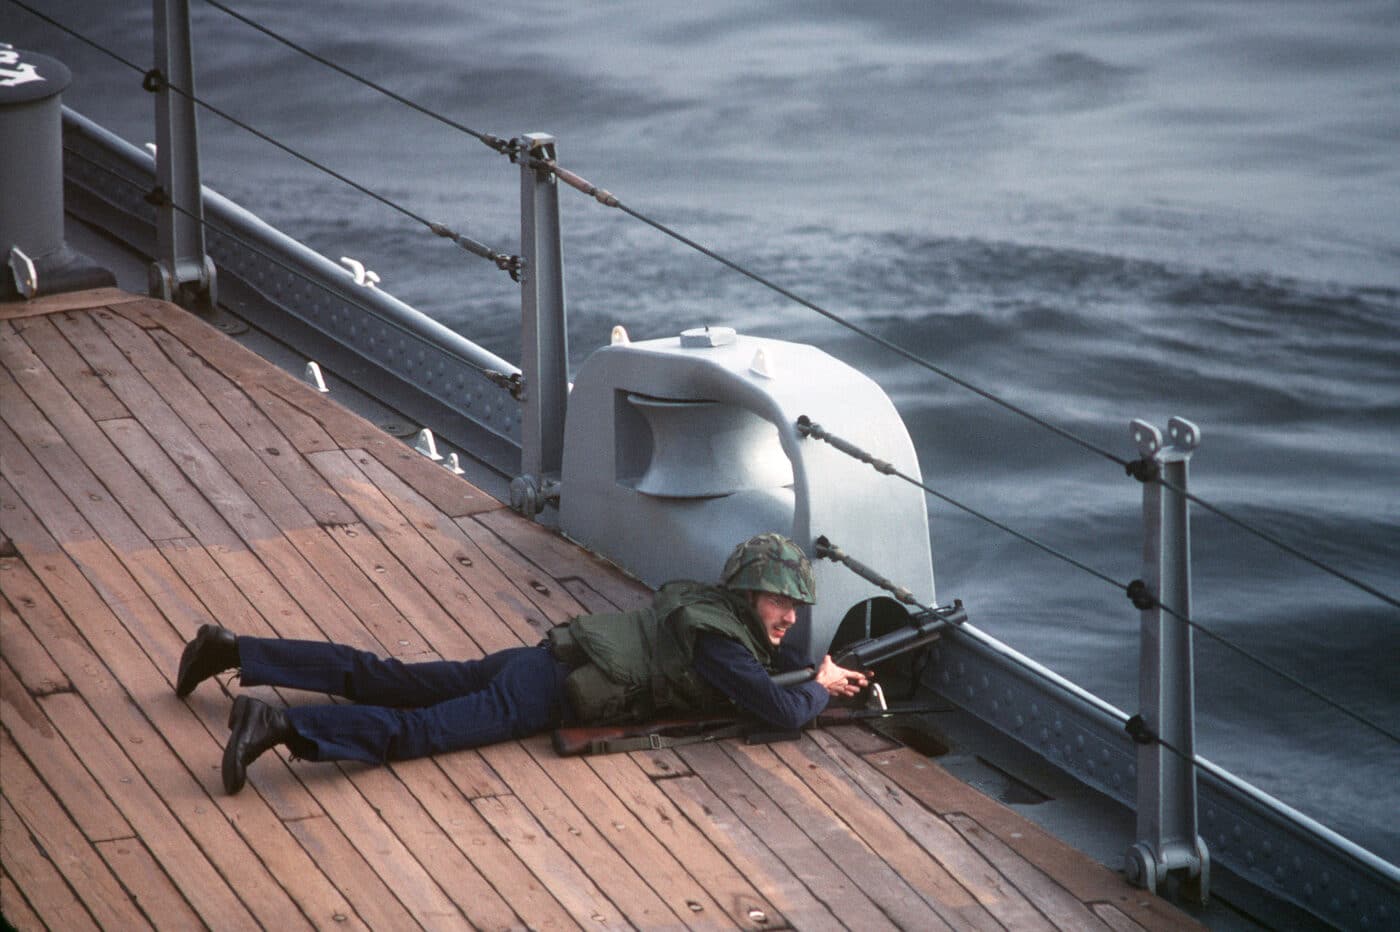 M14 rifle used by soldier on the USS Iowa